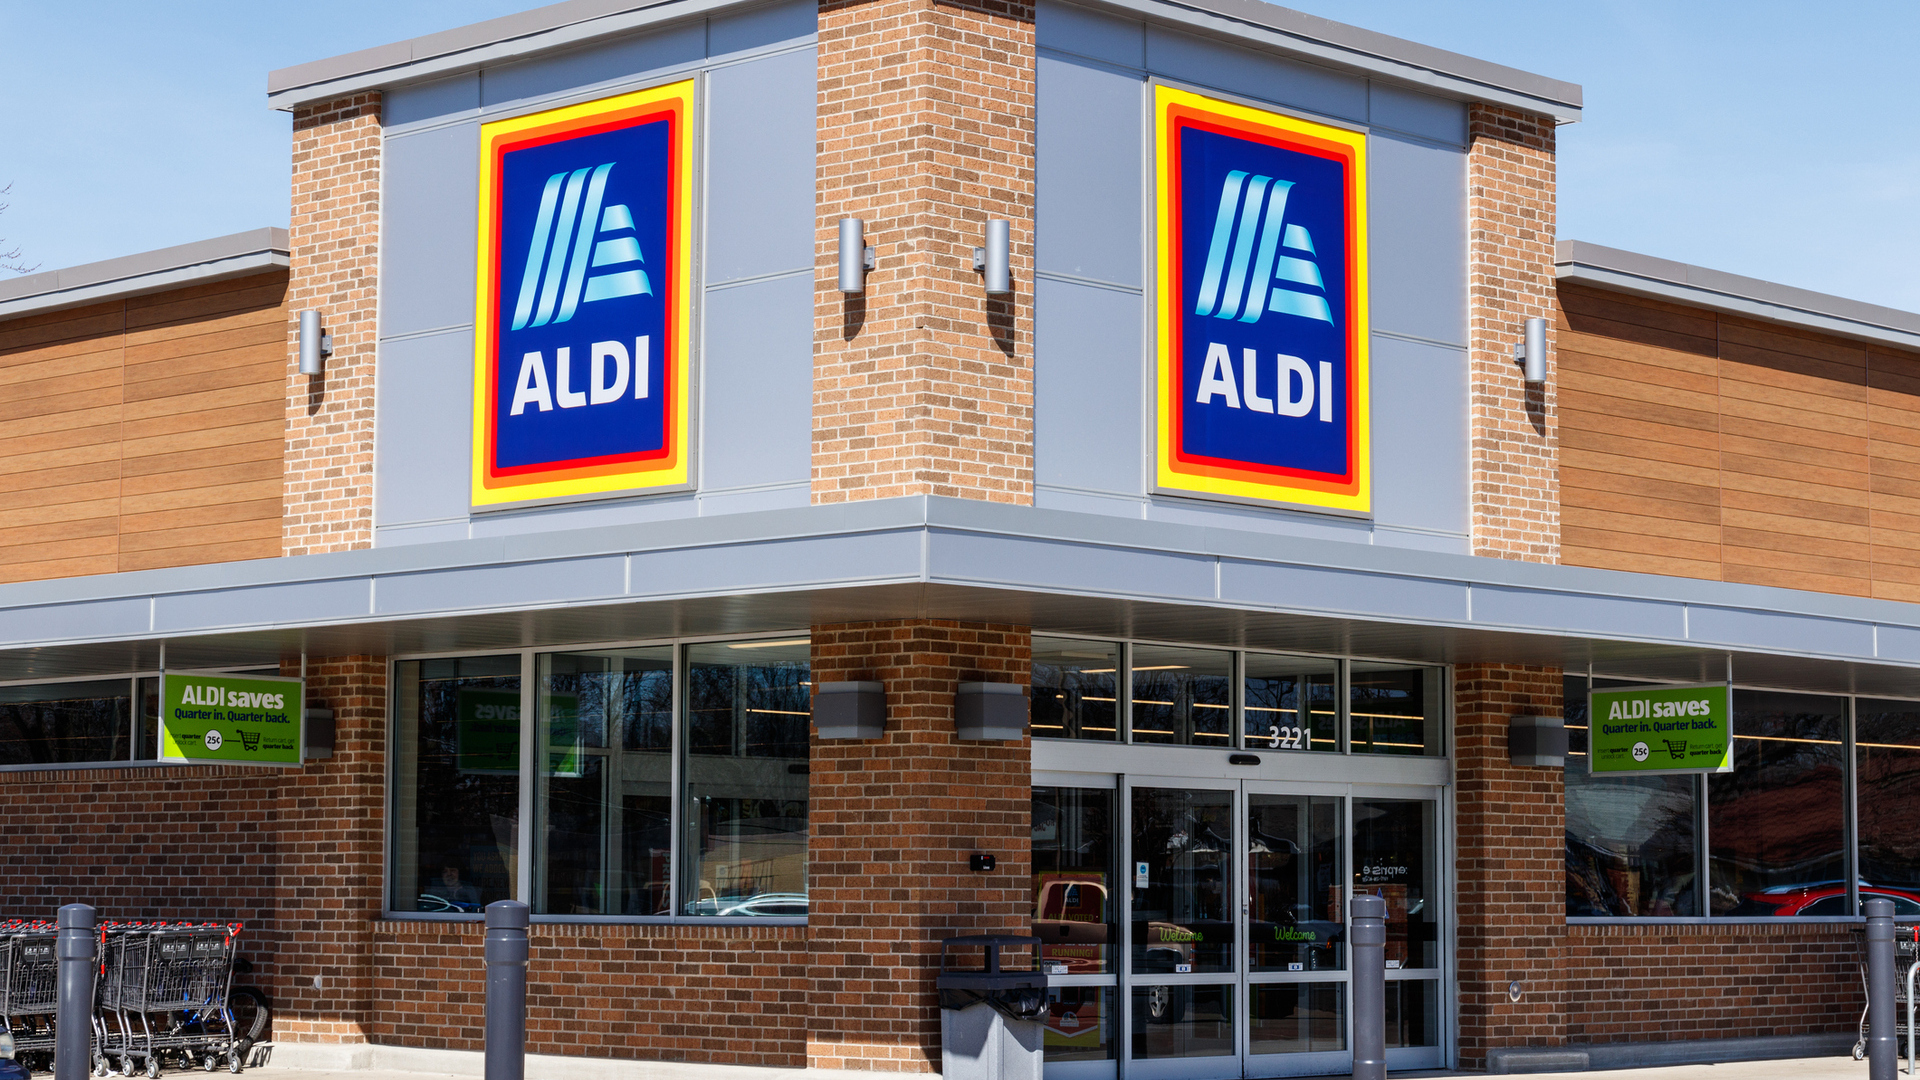 8 aldi items to buy to save money this memorial day